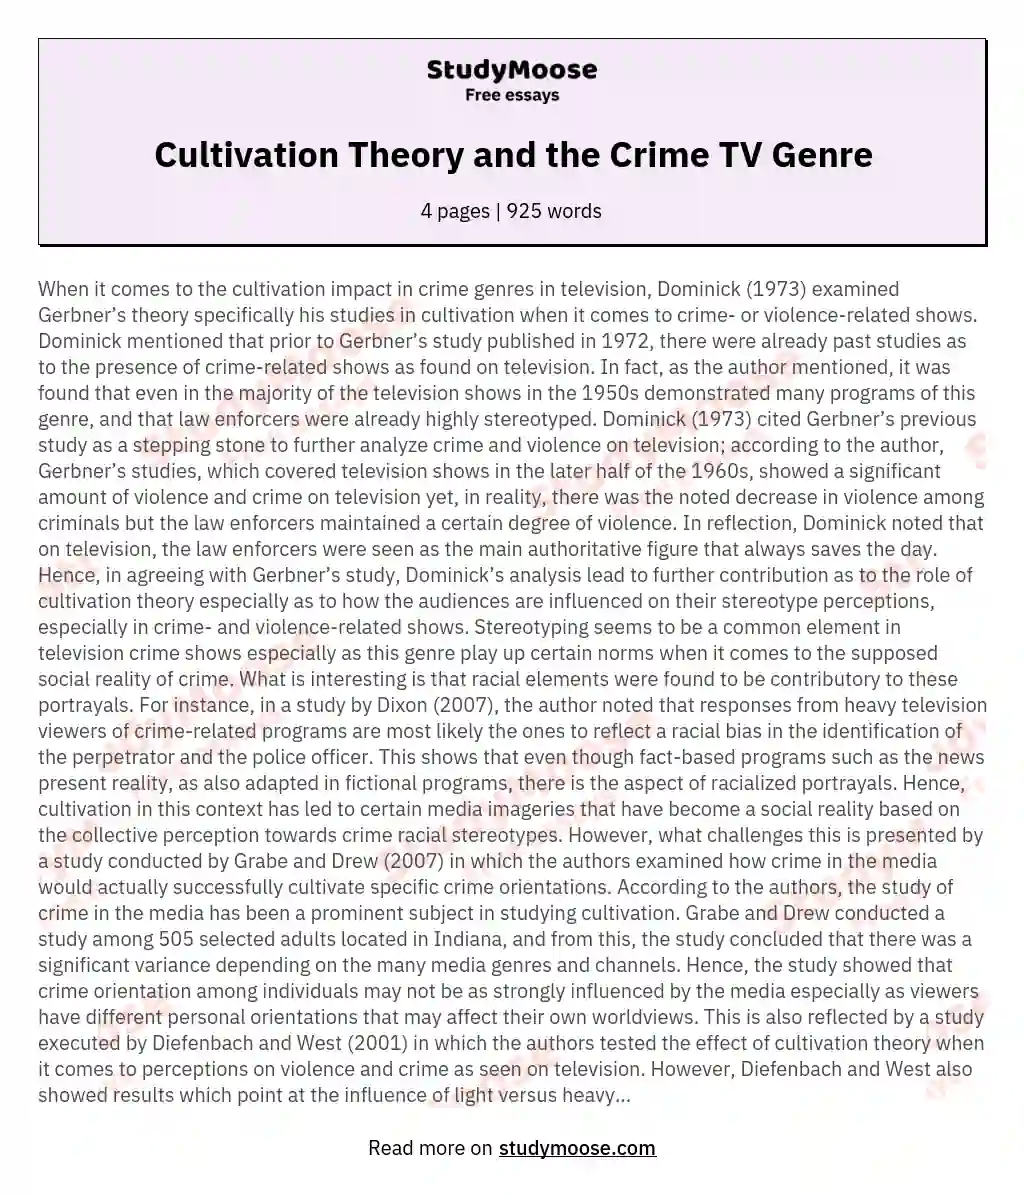 Cultivation Theory and the Crime TV Genre essay